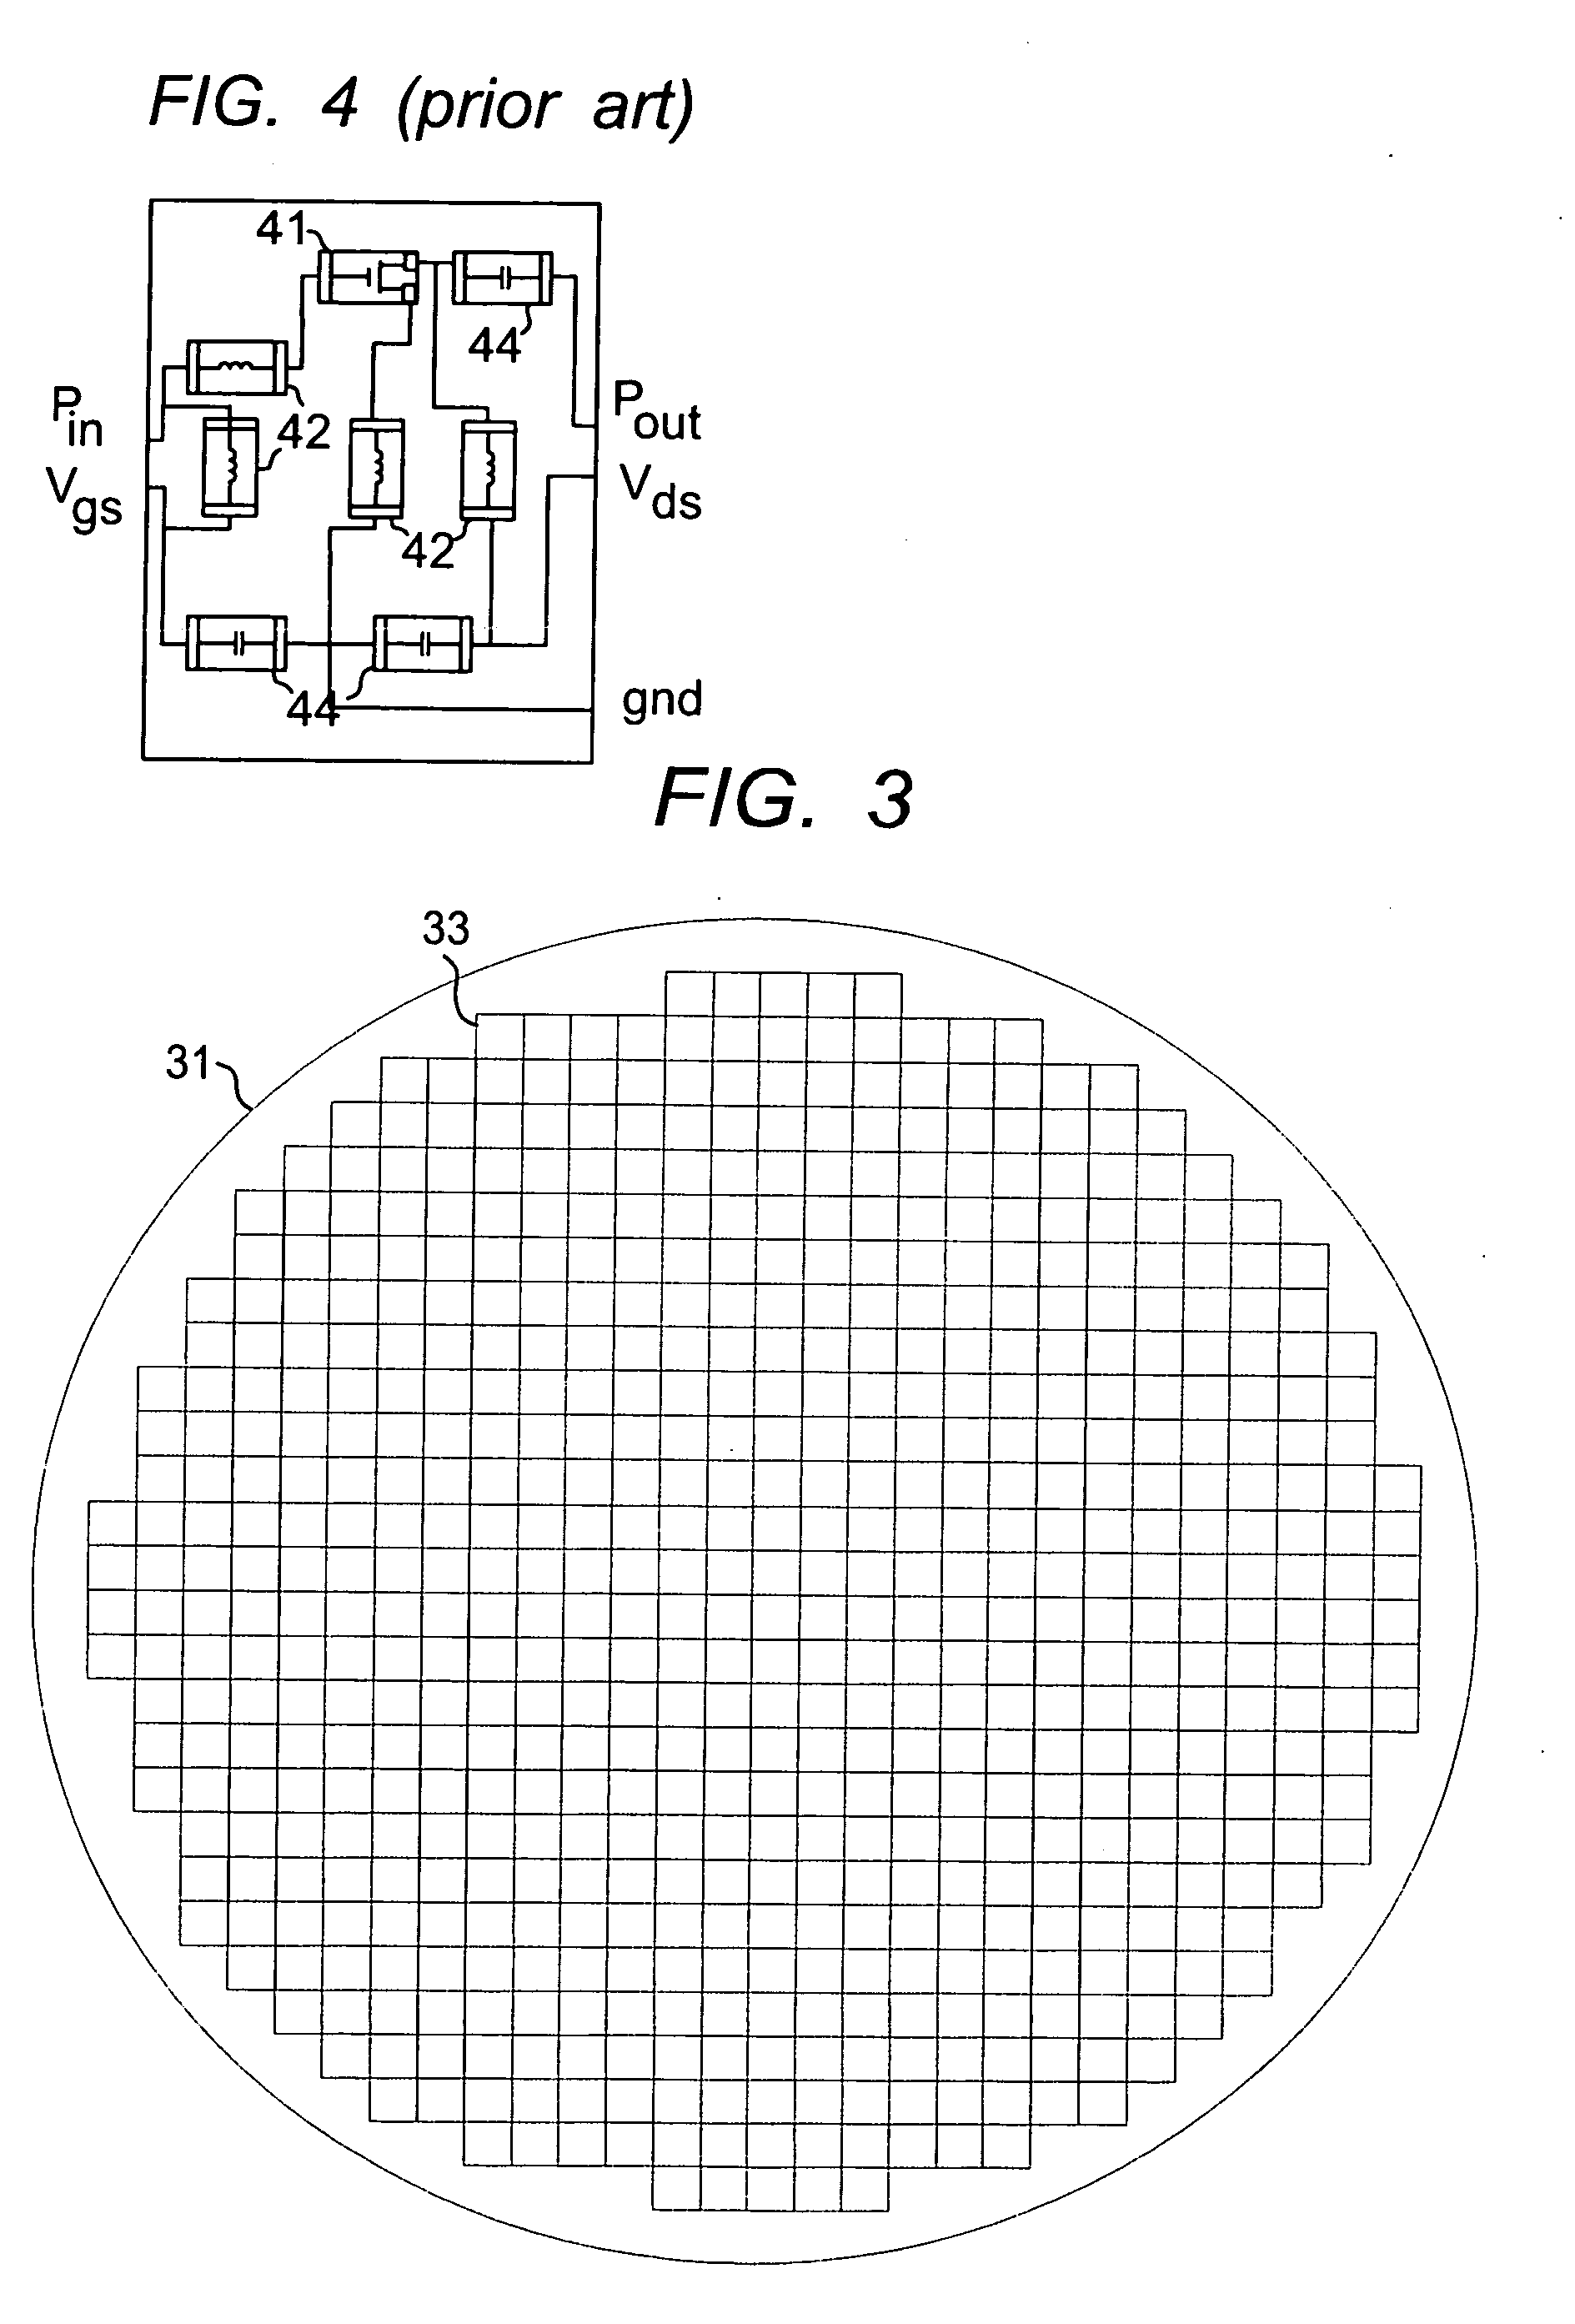 Integrated passive device substrates